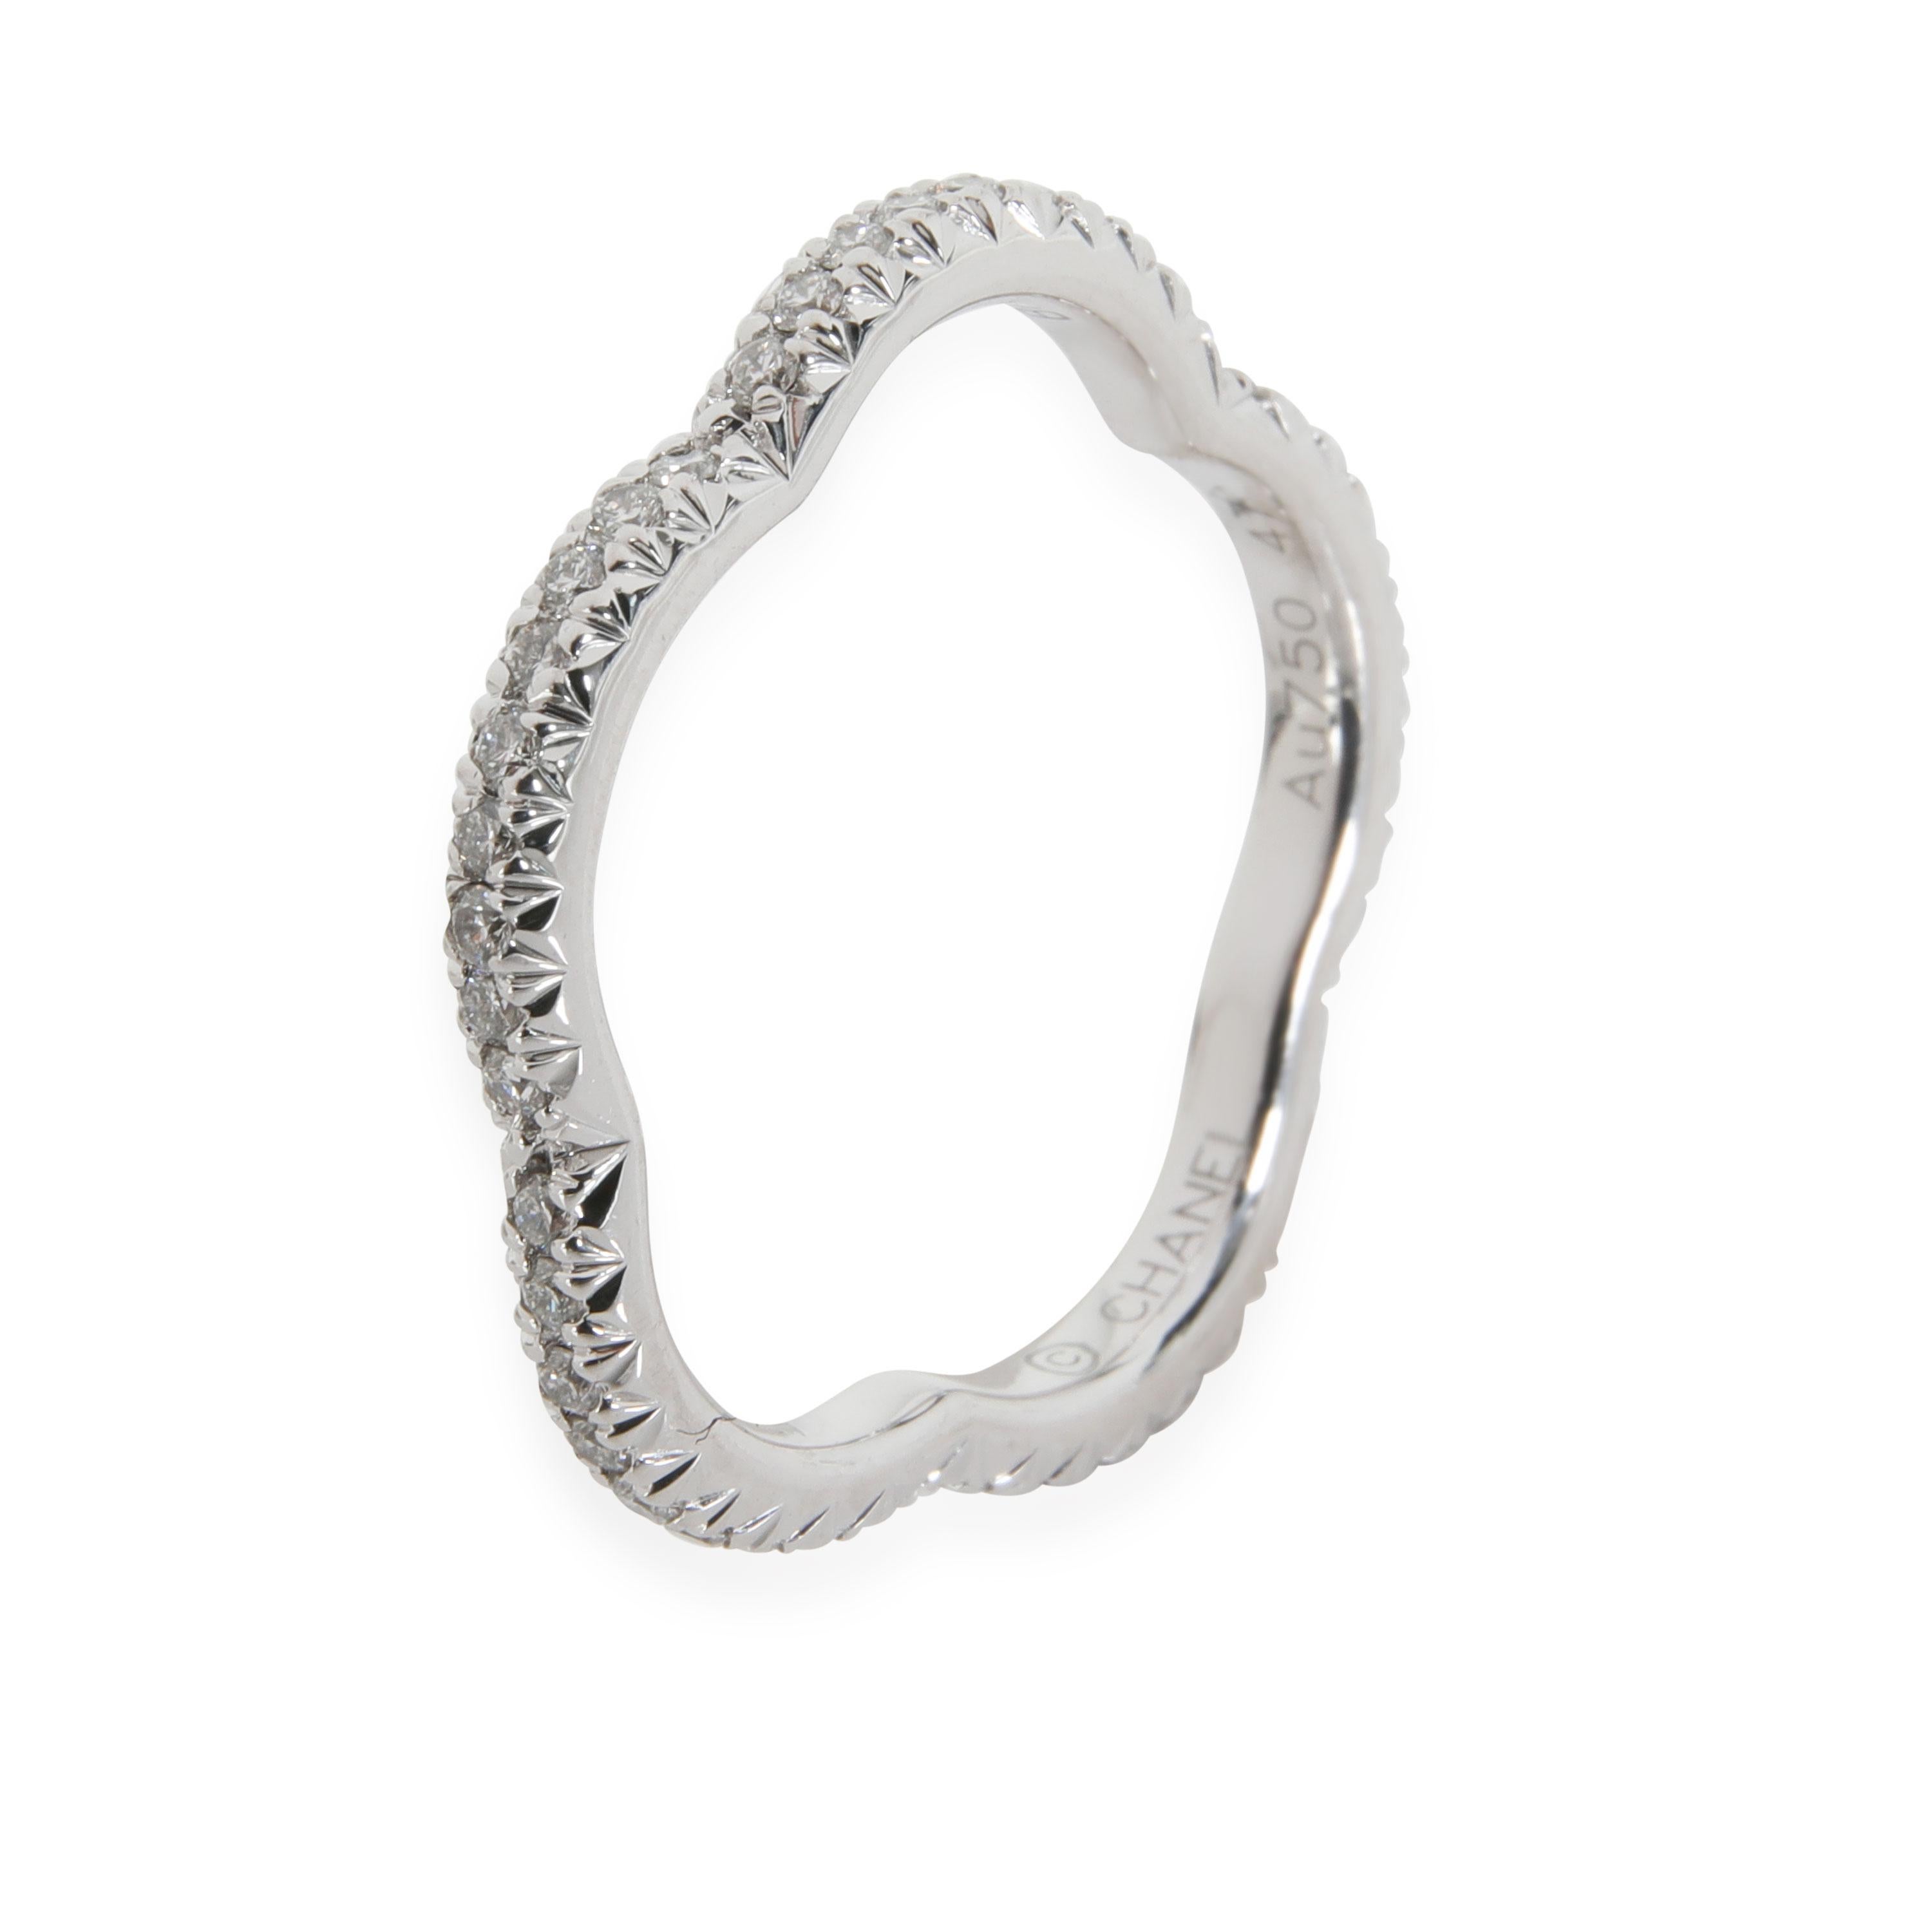 Chanel Camelia Diamond Wedding Band in 18K White Gold 0.23 CTW

PRIMARY DETAILS
SKU: 115005
Listing Title: Chanel Camelia Diamond Wedding Band in 18K White Gold 0.23 CTW
Condition Description: Retails for 2000 USD. In excellent condition and